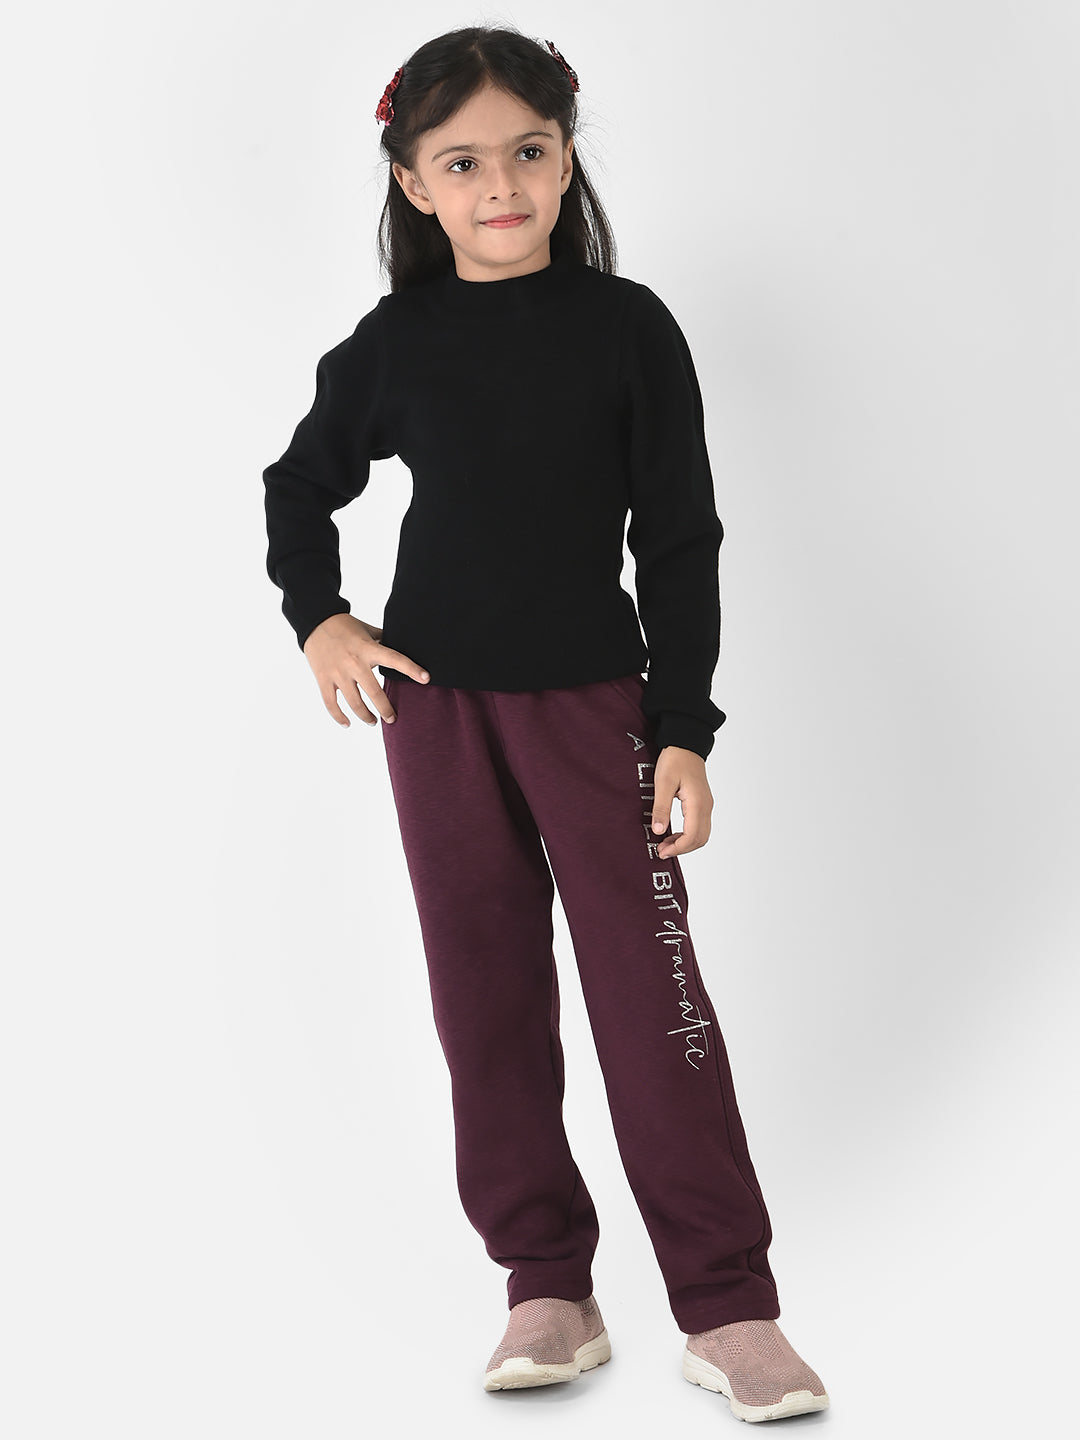 Purple Track Pants with Typographic Detailing 